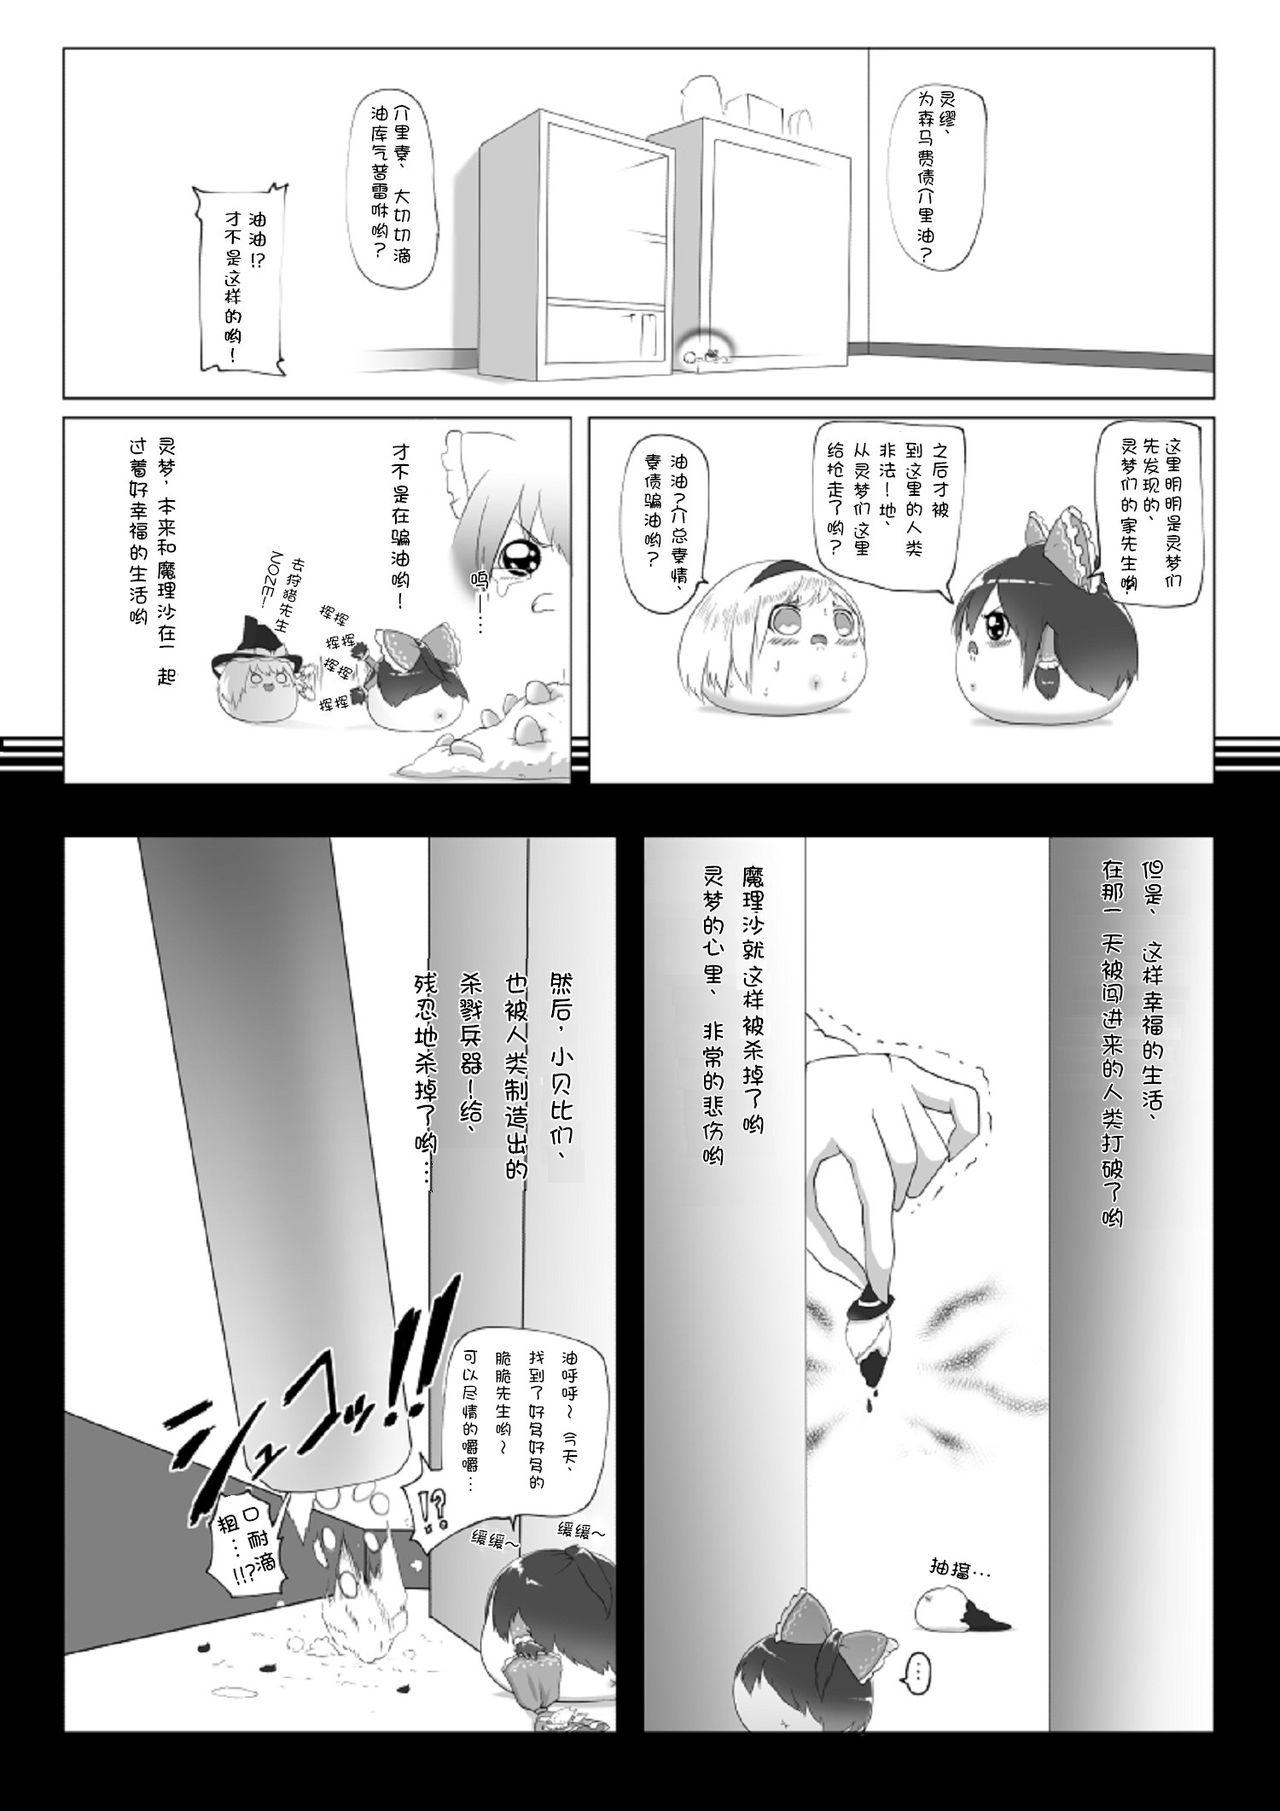 Teenxxx ゆっくりがかってにはえてくるわけ（Chinese) - Touhou project Cruising - Page 5